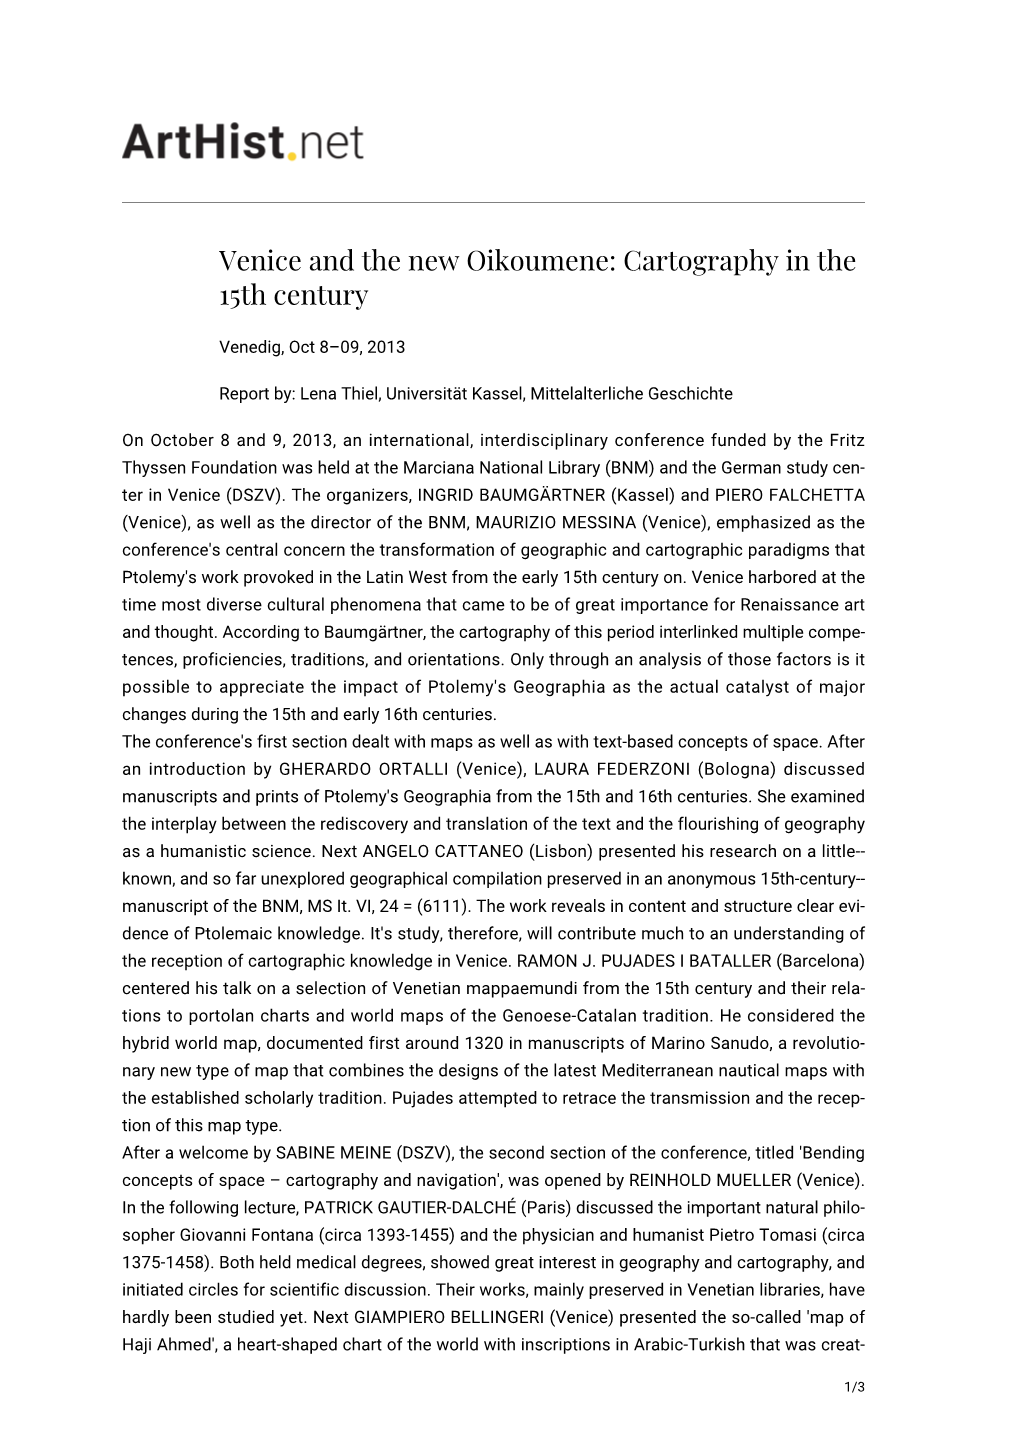 Venice and the New Oikoumene: Cartography in the 15Th Century